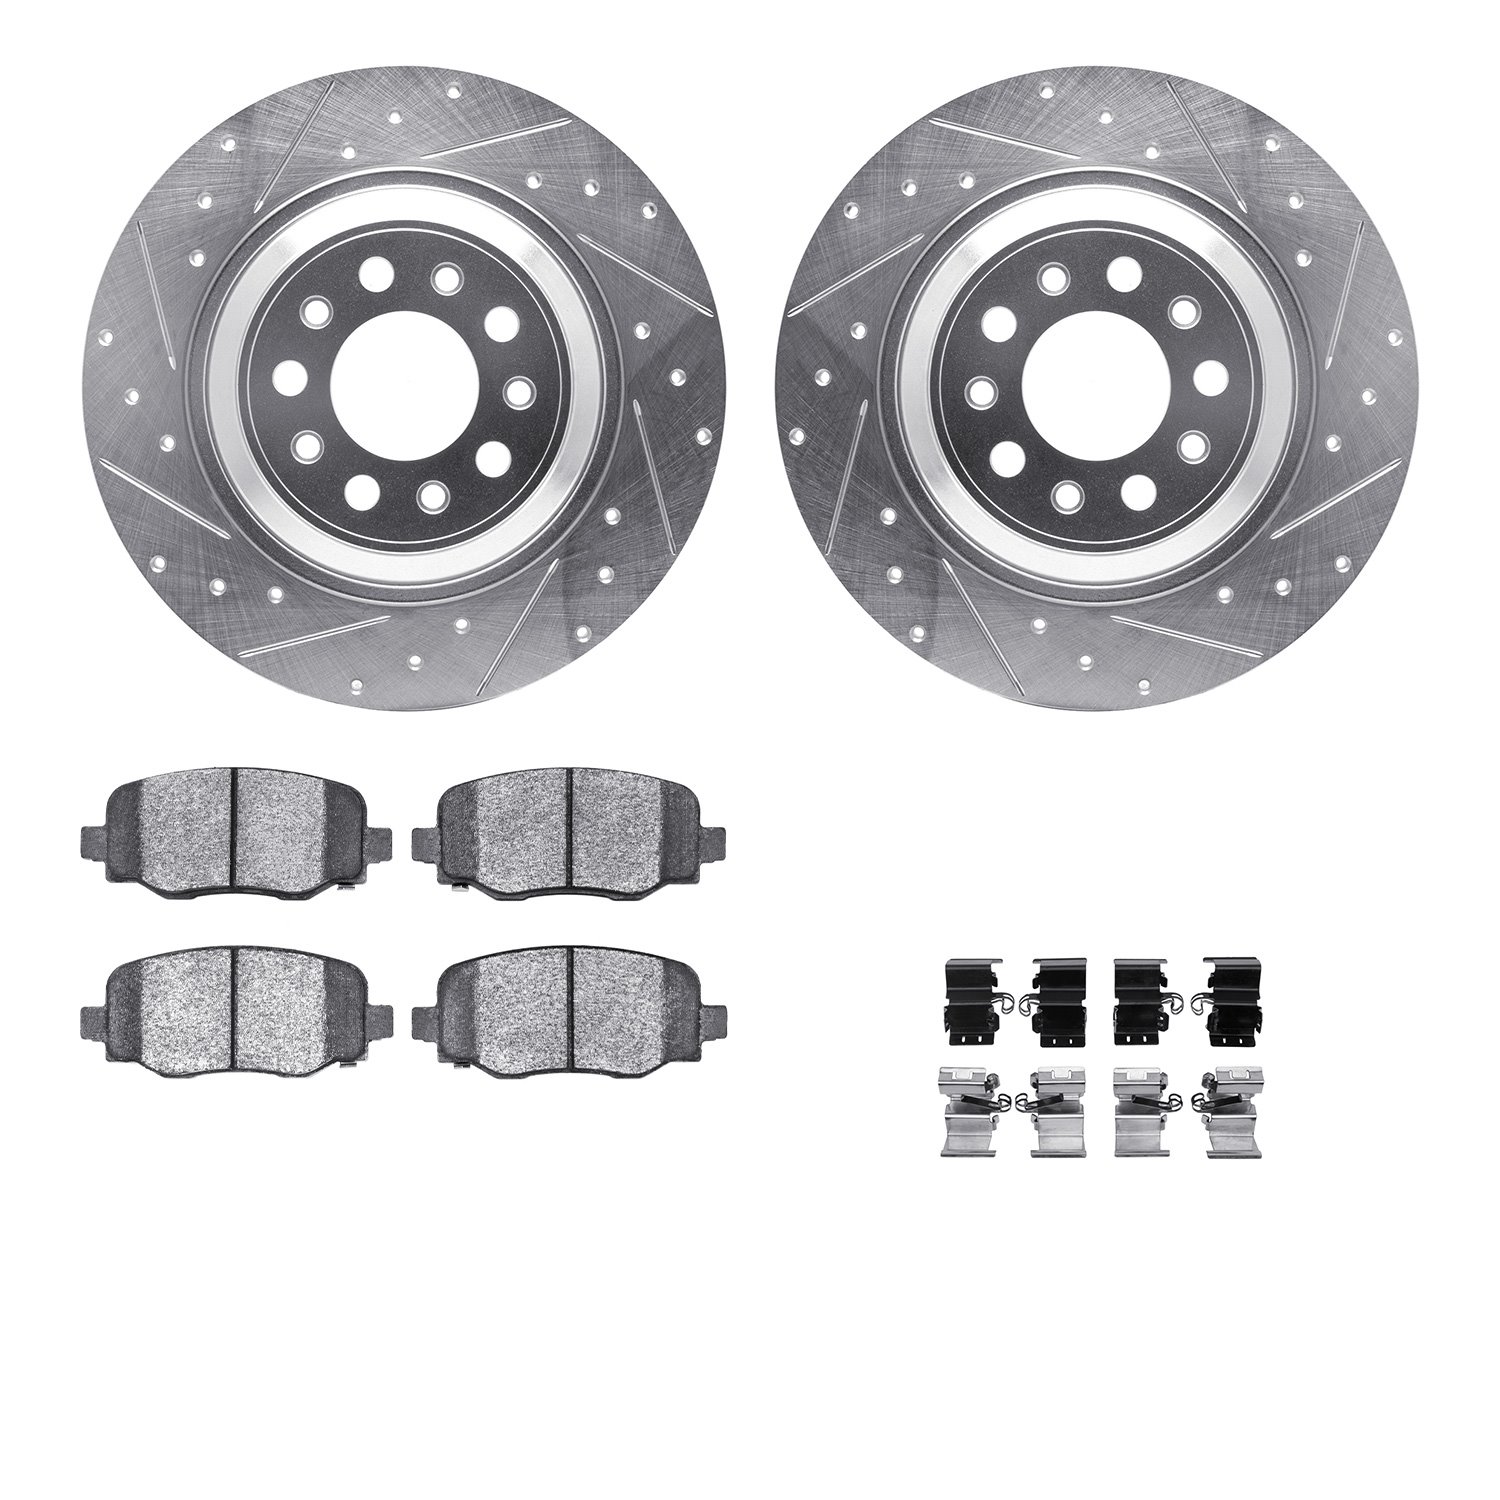 7412-42012 Drilled/Slotted Brake Rotors with Ultimate-Duty Brake Pads Kit & Hardware [Silver], Fits Select Mopar, Position: Rear